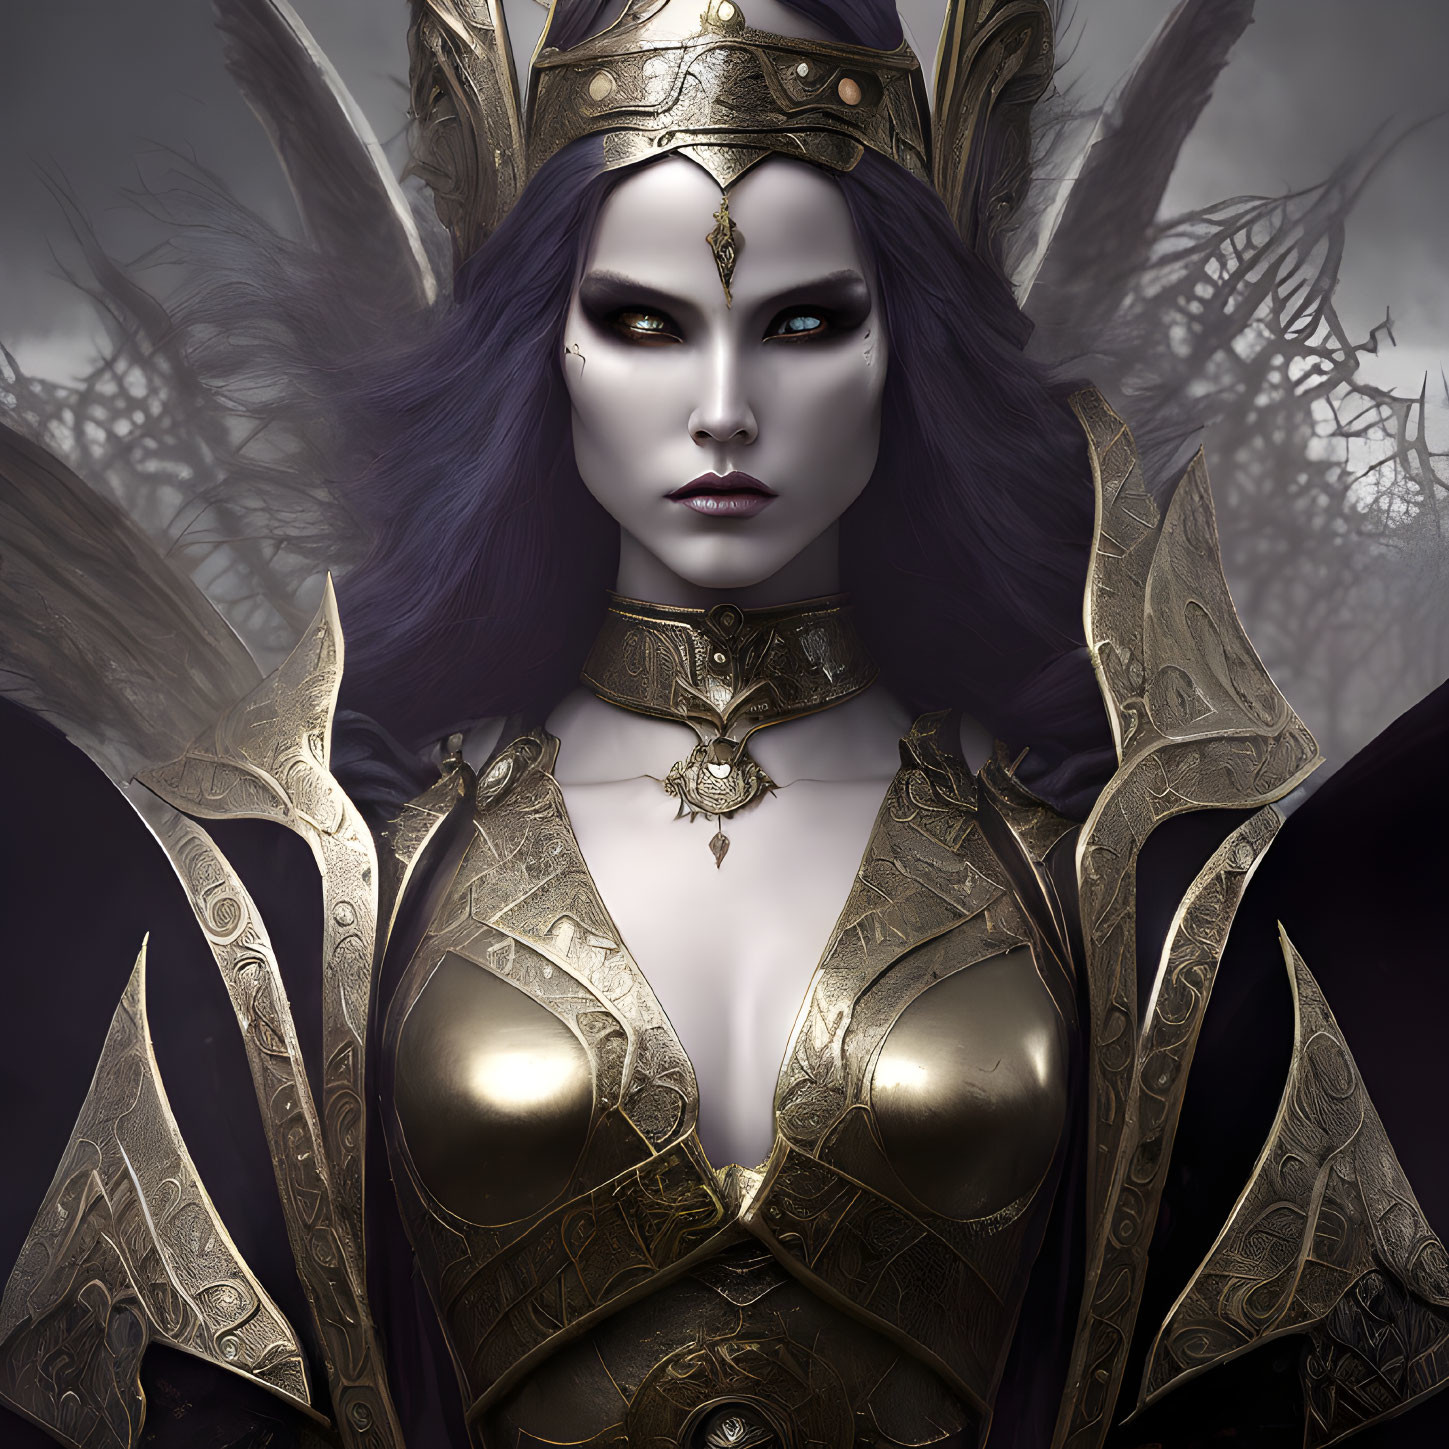 Purple-skinned fantasy figure in golden armor with intricate headdress and yellow eyes against branch-filled backdrop